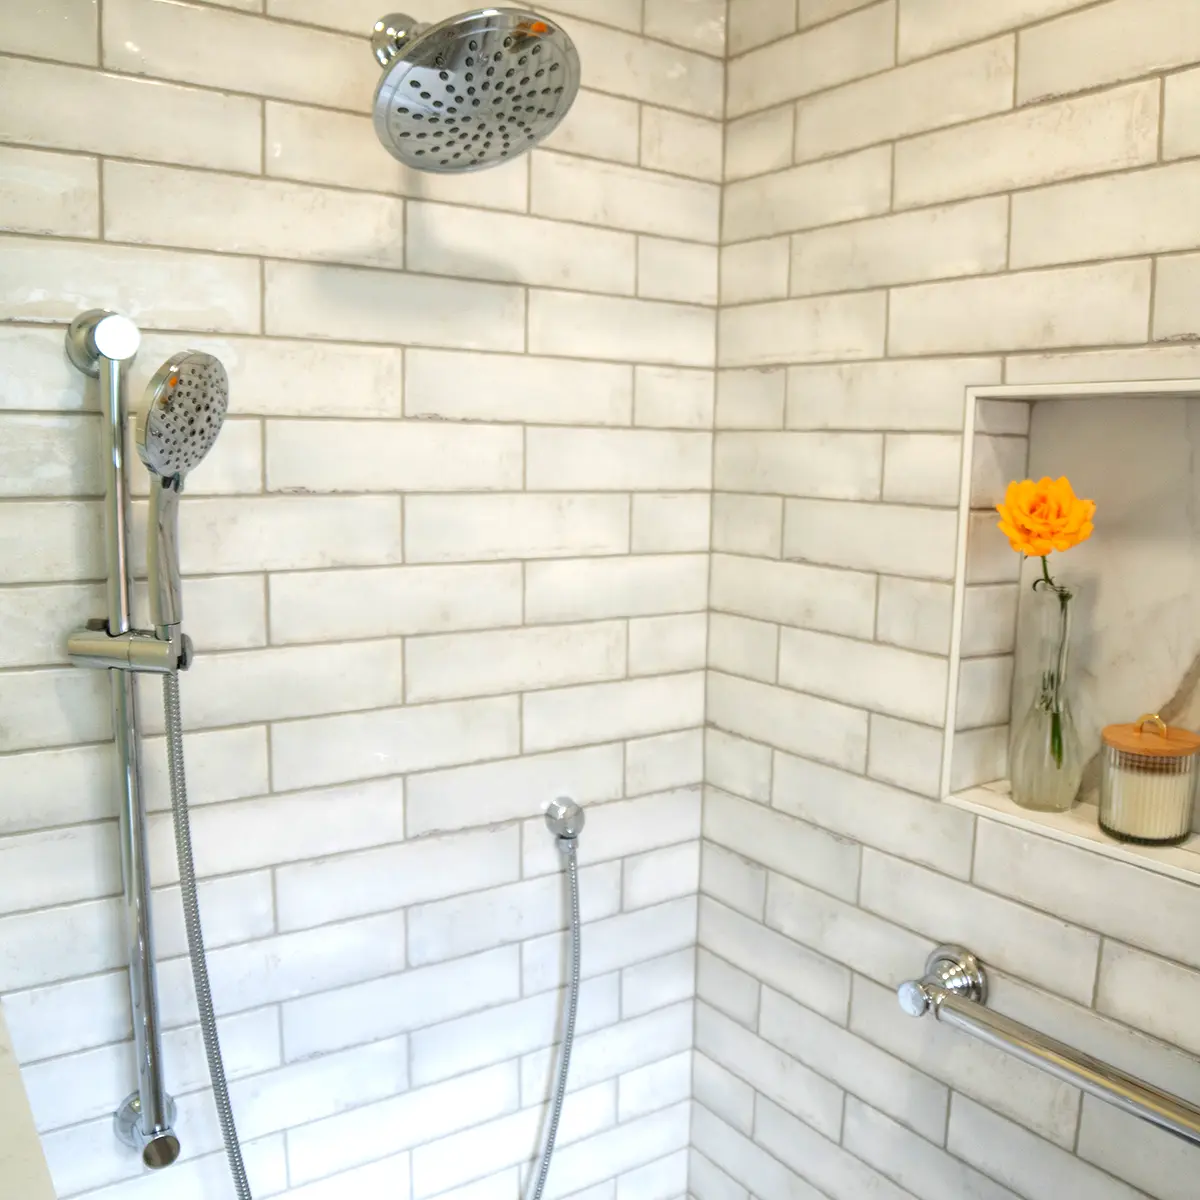 A remodeled shower with white tiling and a vase with an orange flower